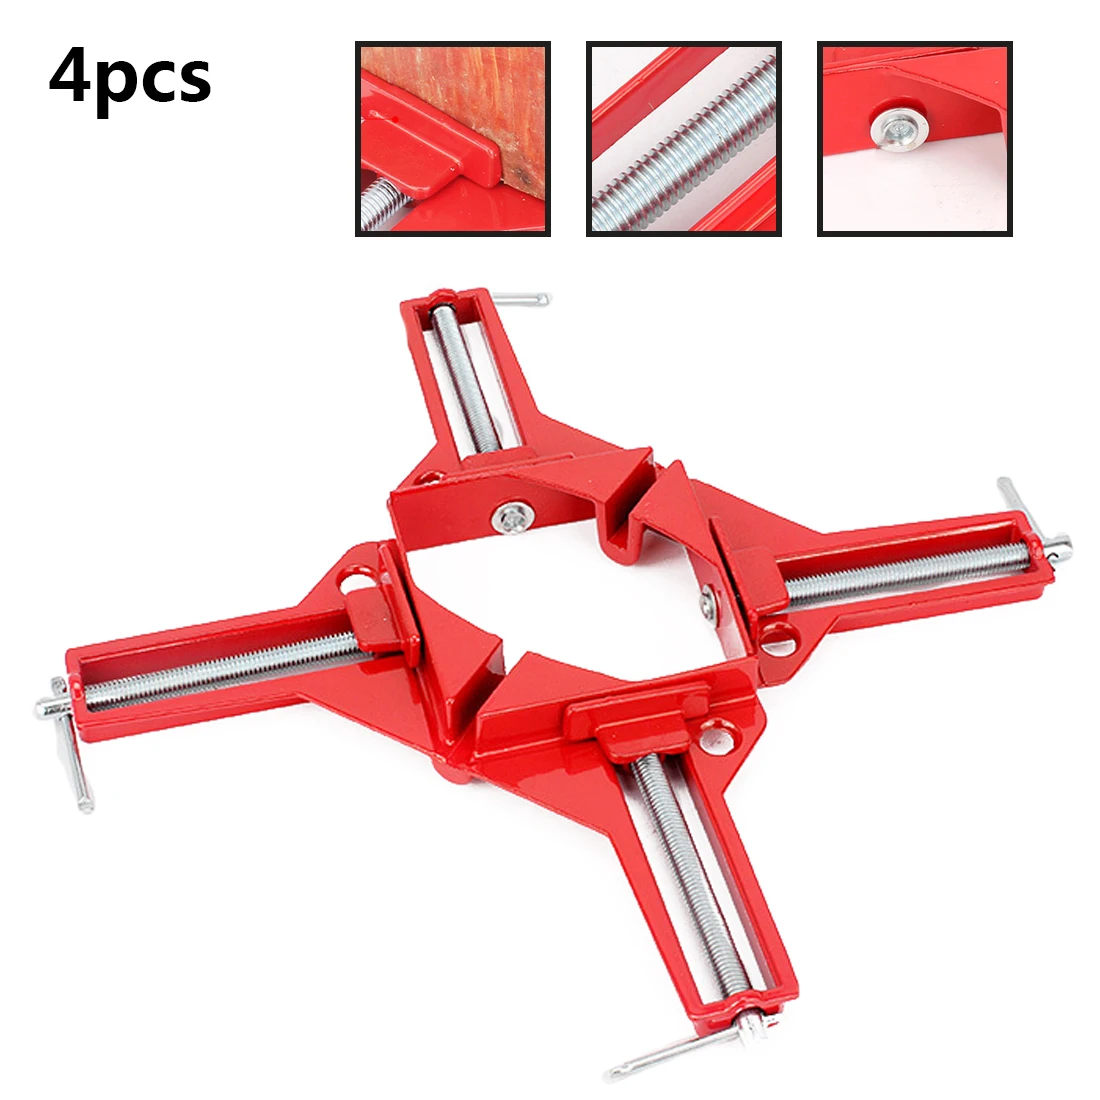 Ochoos by DHL 50pcs Multifunction 90 Degree Right Angle Clip Frame Corner Clamp 100MM Mitre Clamps Corner Holder Woodworking Hand Tool 